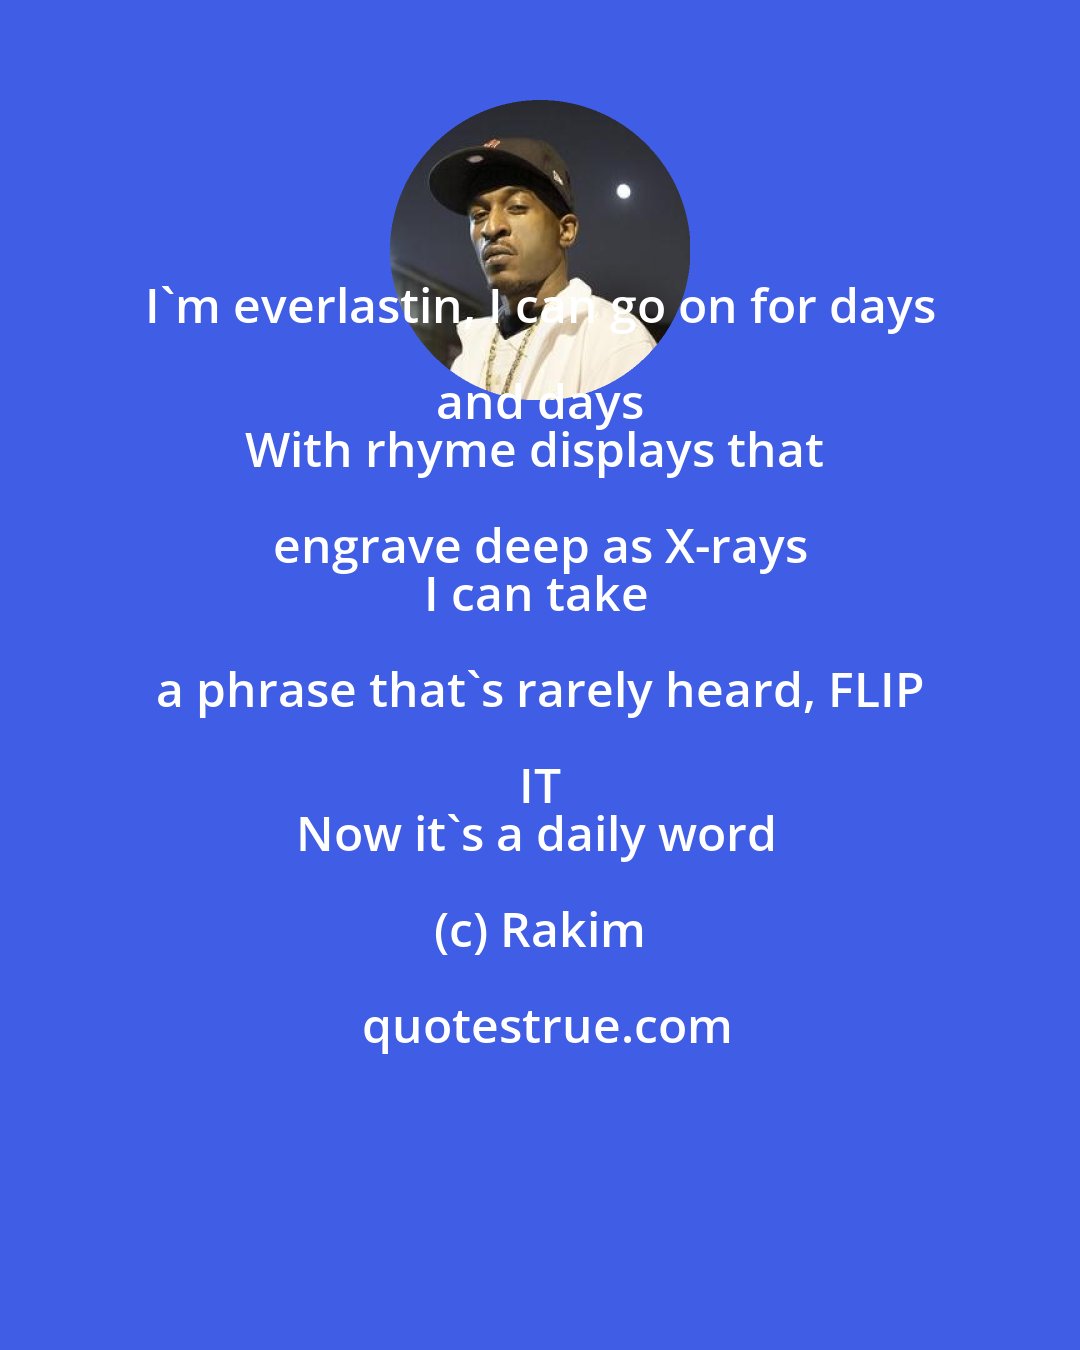 Rakim: I'm everlastin, I can go on for days and days 
With rhyme displays that engrave deep as X-rays 
I can take a phrase that's rarely heard, FLIP IT 
Now it's a daily word